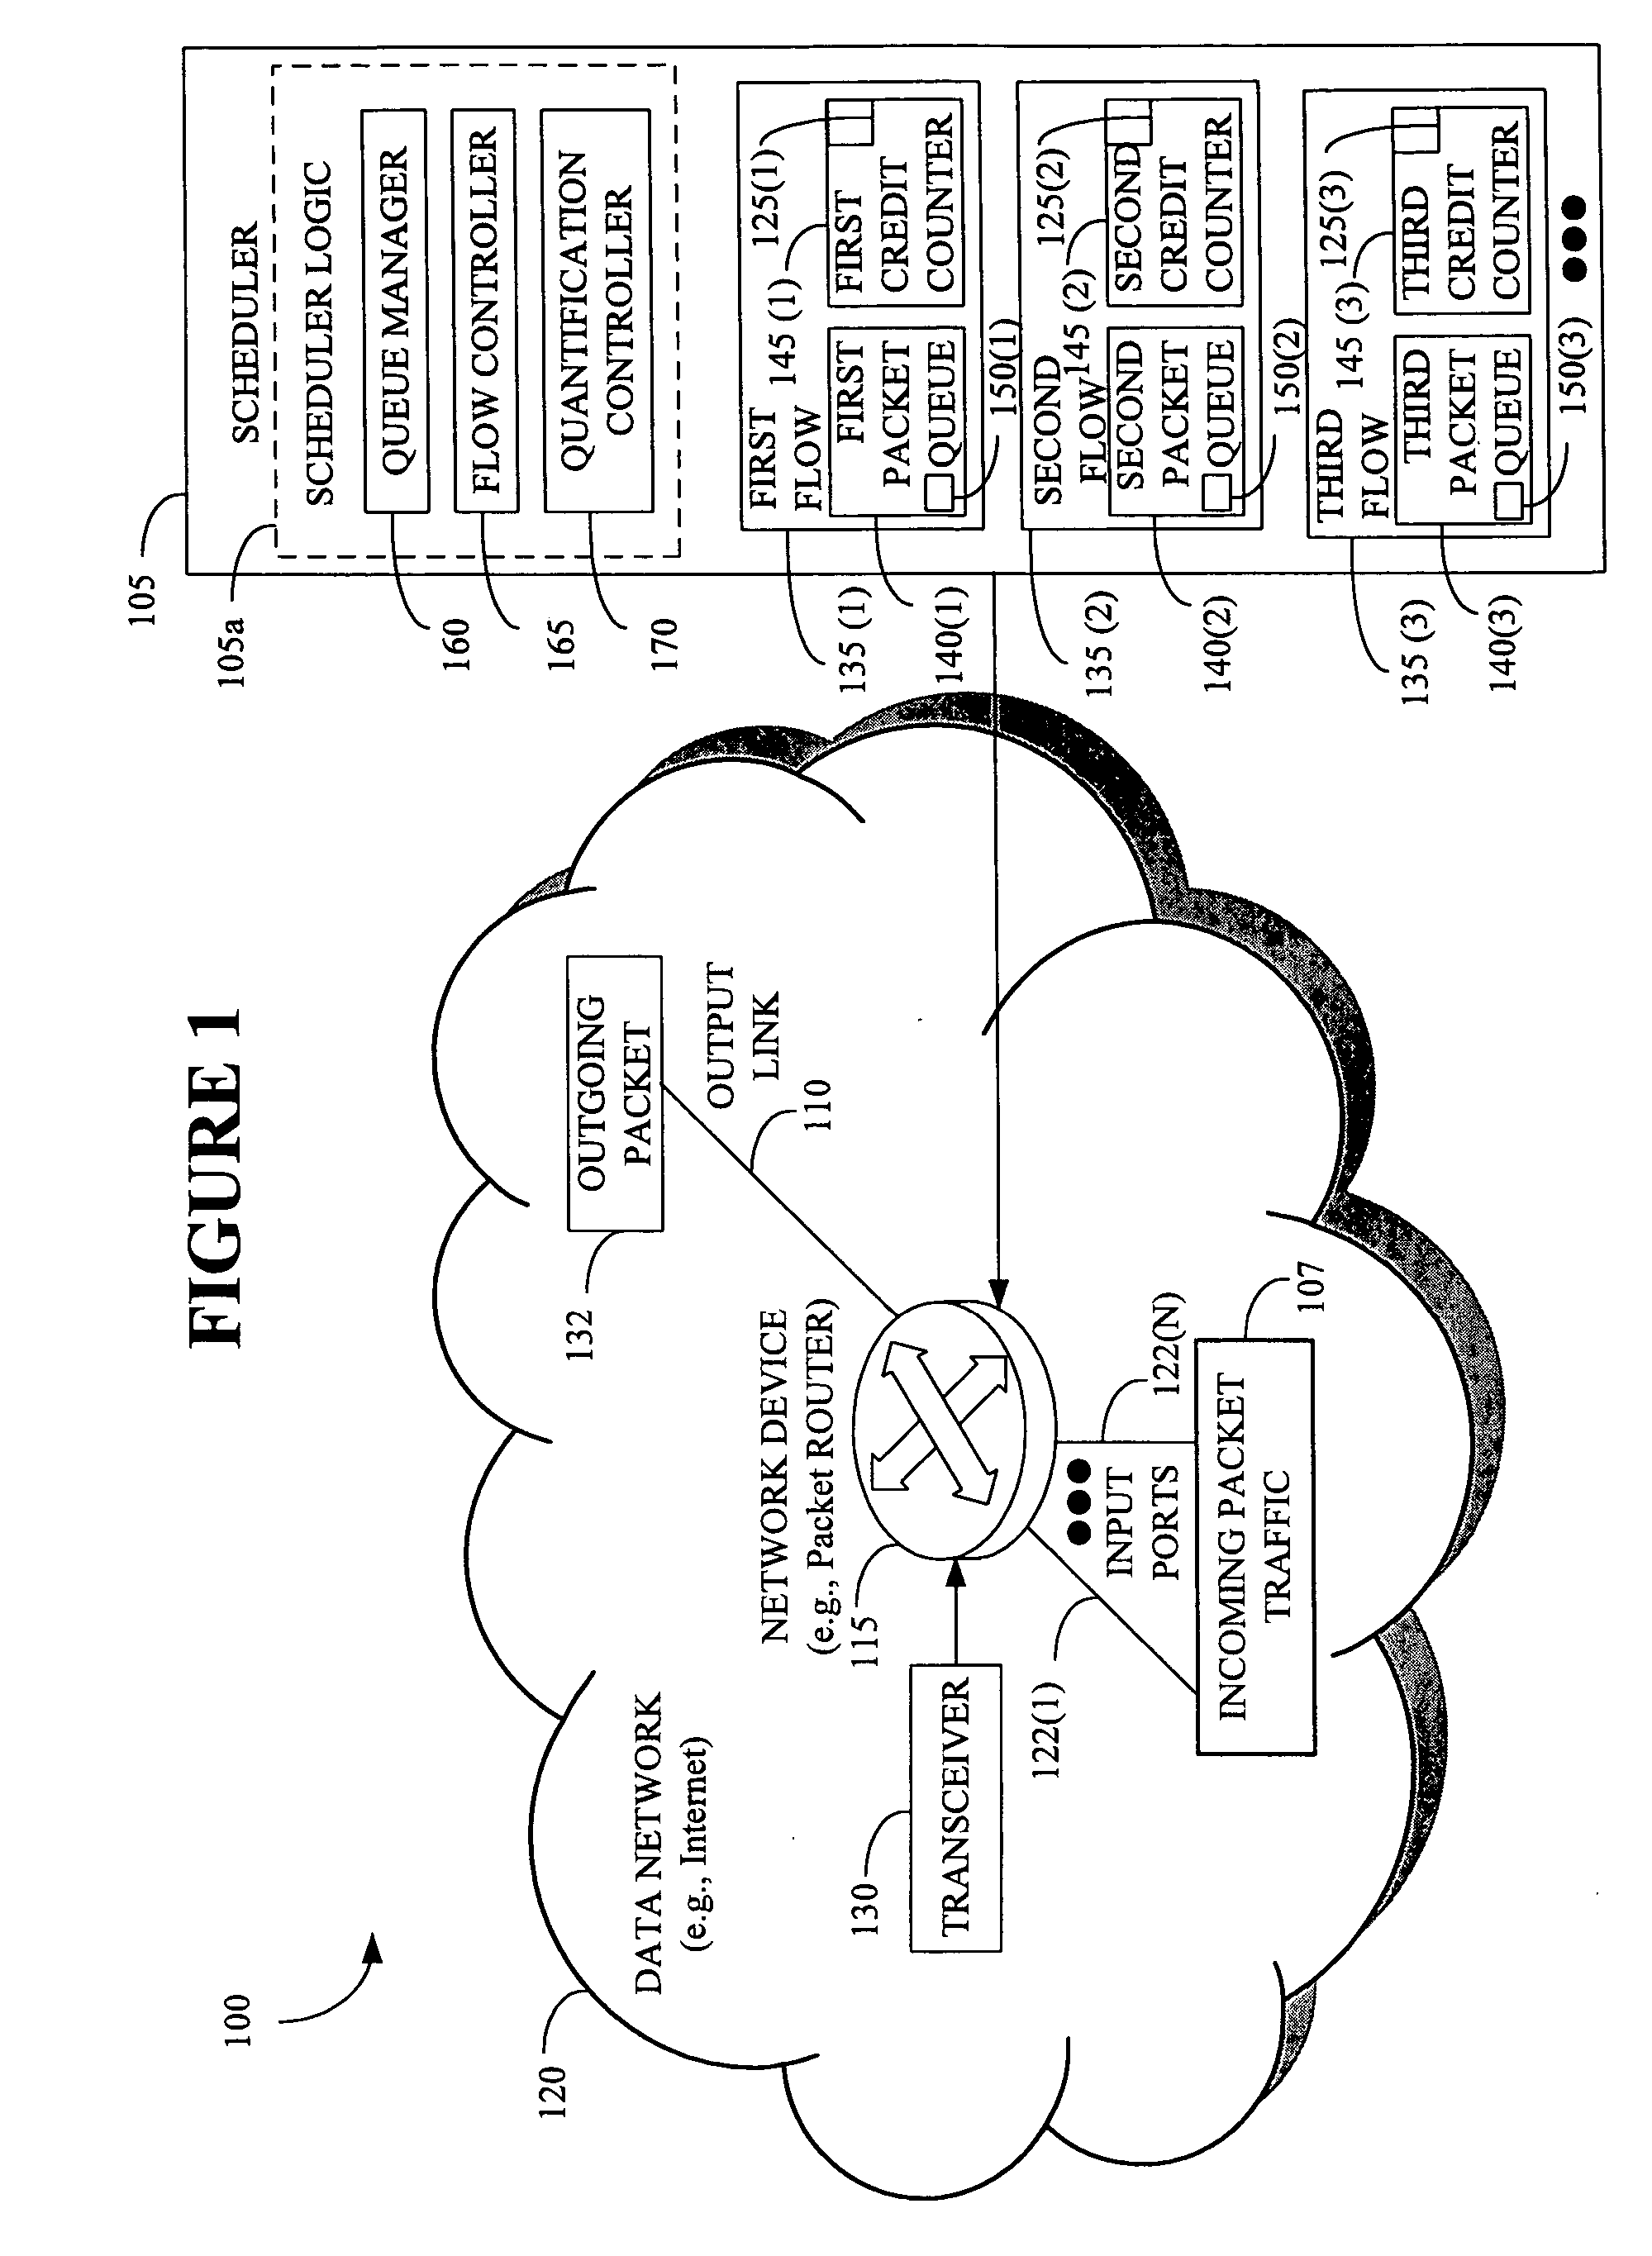 Scheduling incoming packet traffic on an output link of a network device associated with a data network